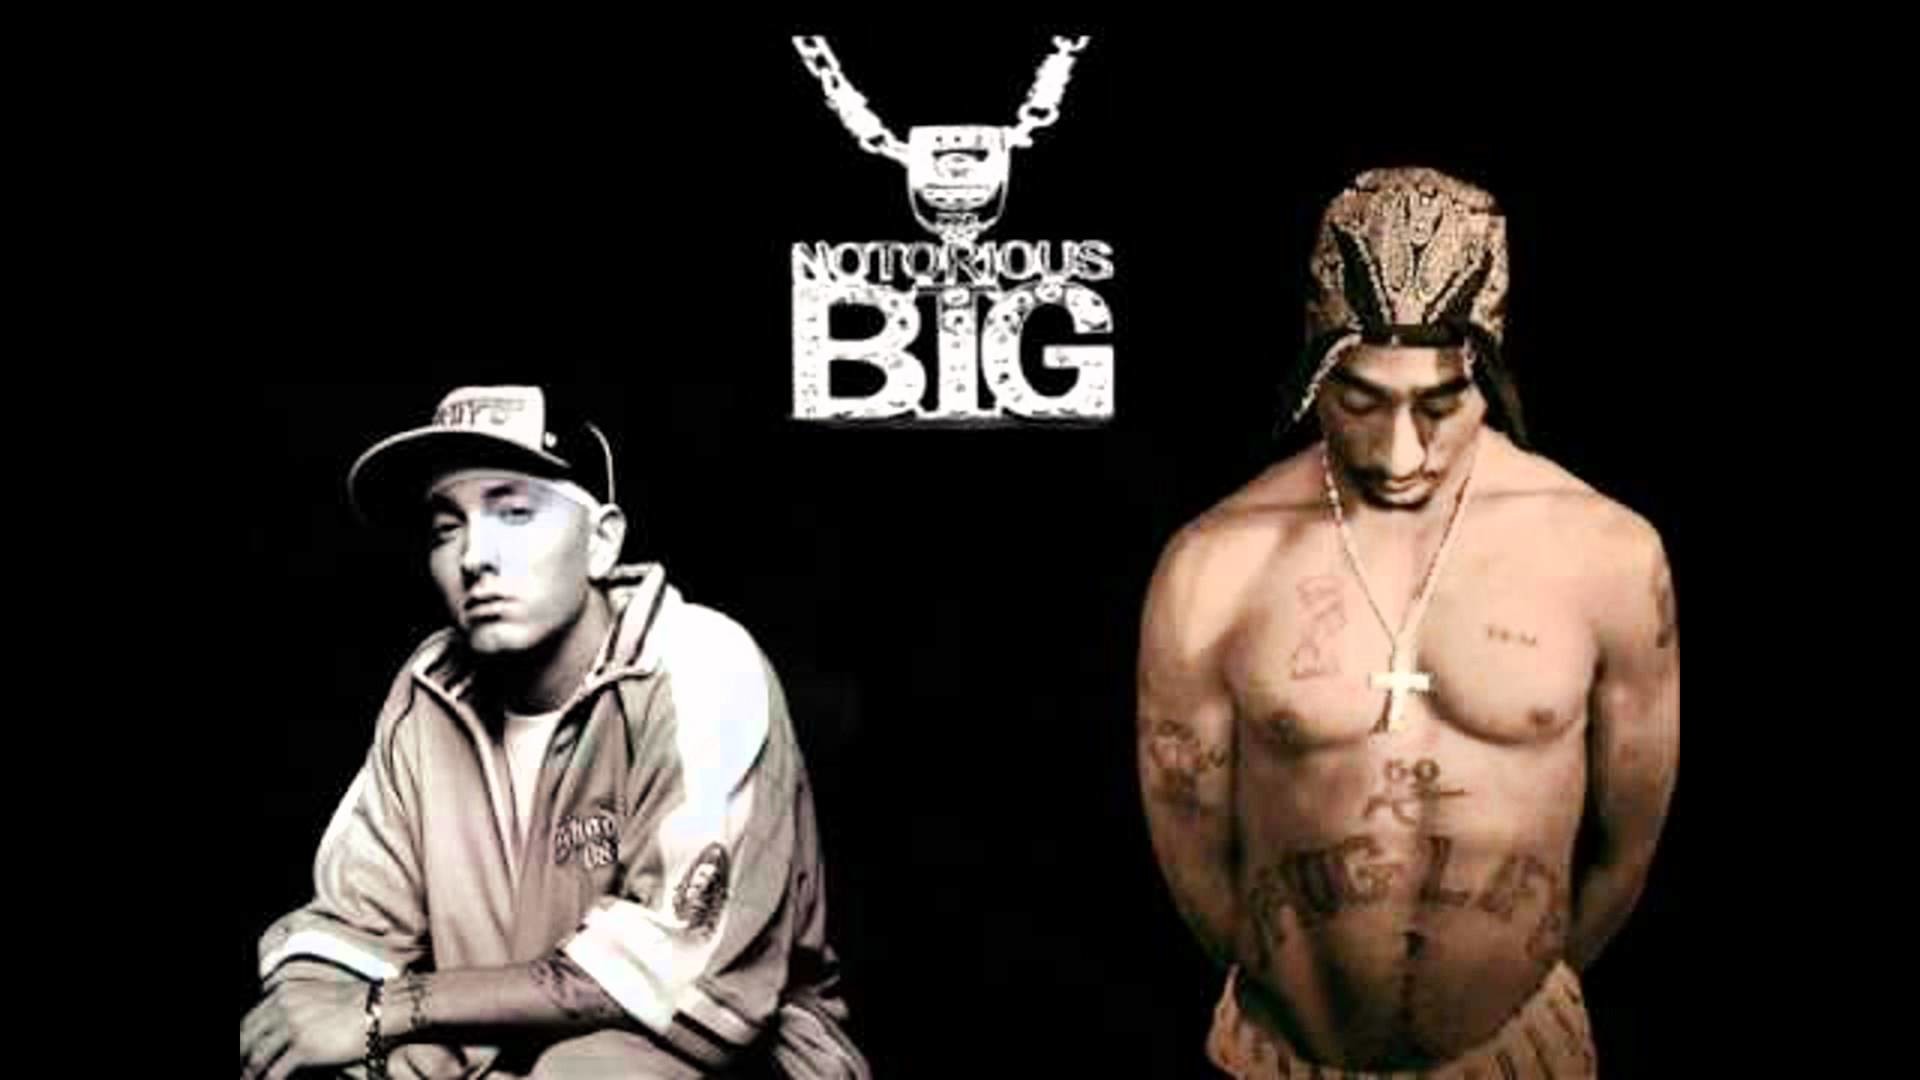 1920x1080 2Pac-Listen To Your Heart (ft. Notorious B.I.G., Roxette & Eminem) - YouTube